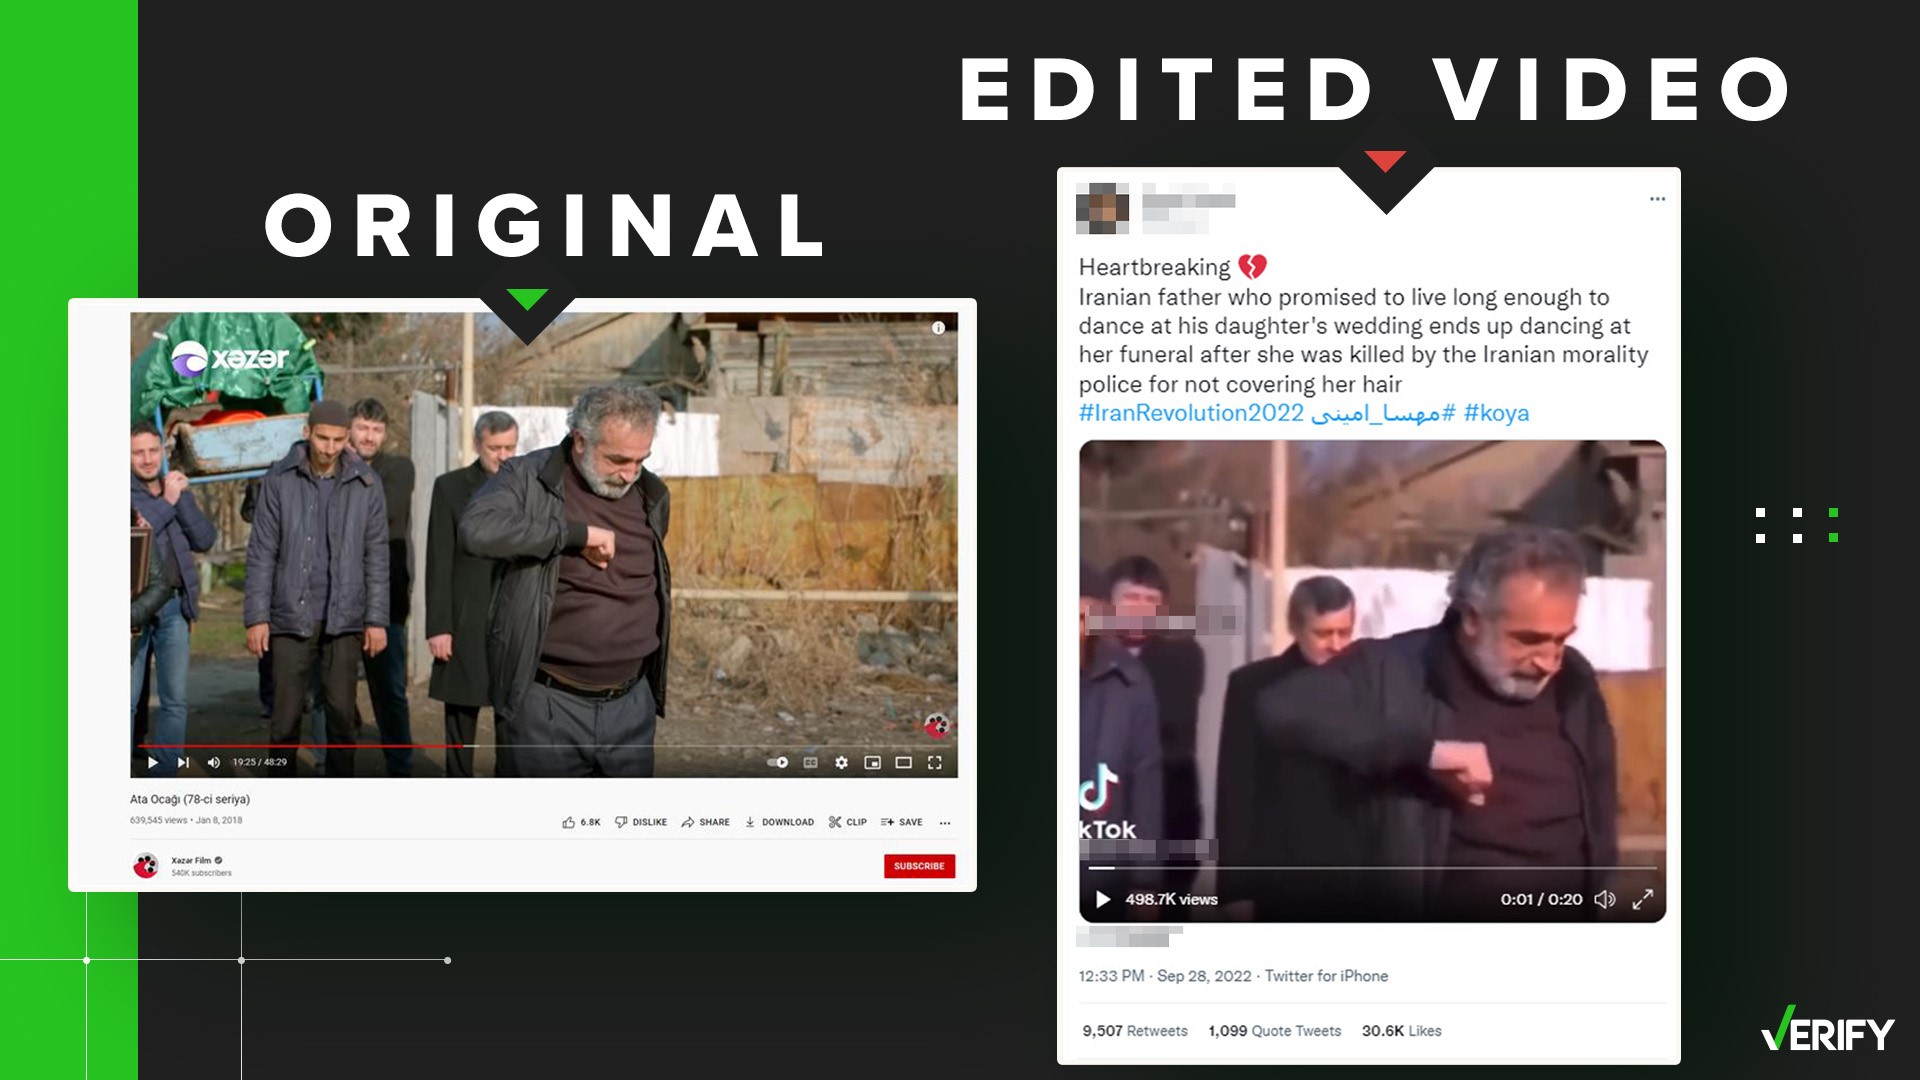 The edited clip shared on social media uses years-old footage from an Azerbaijani TV show and doesn't depict current events in Iran.